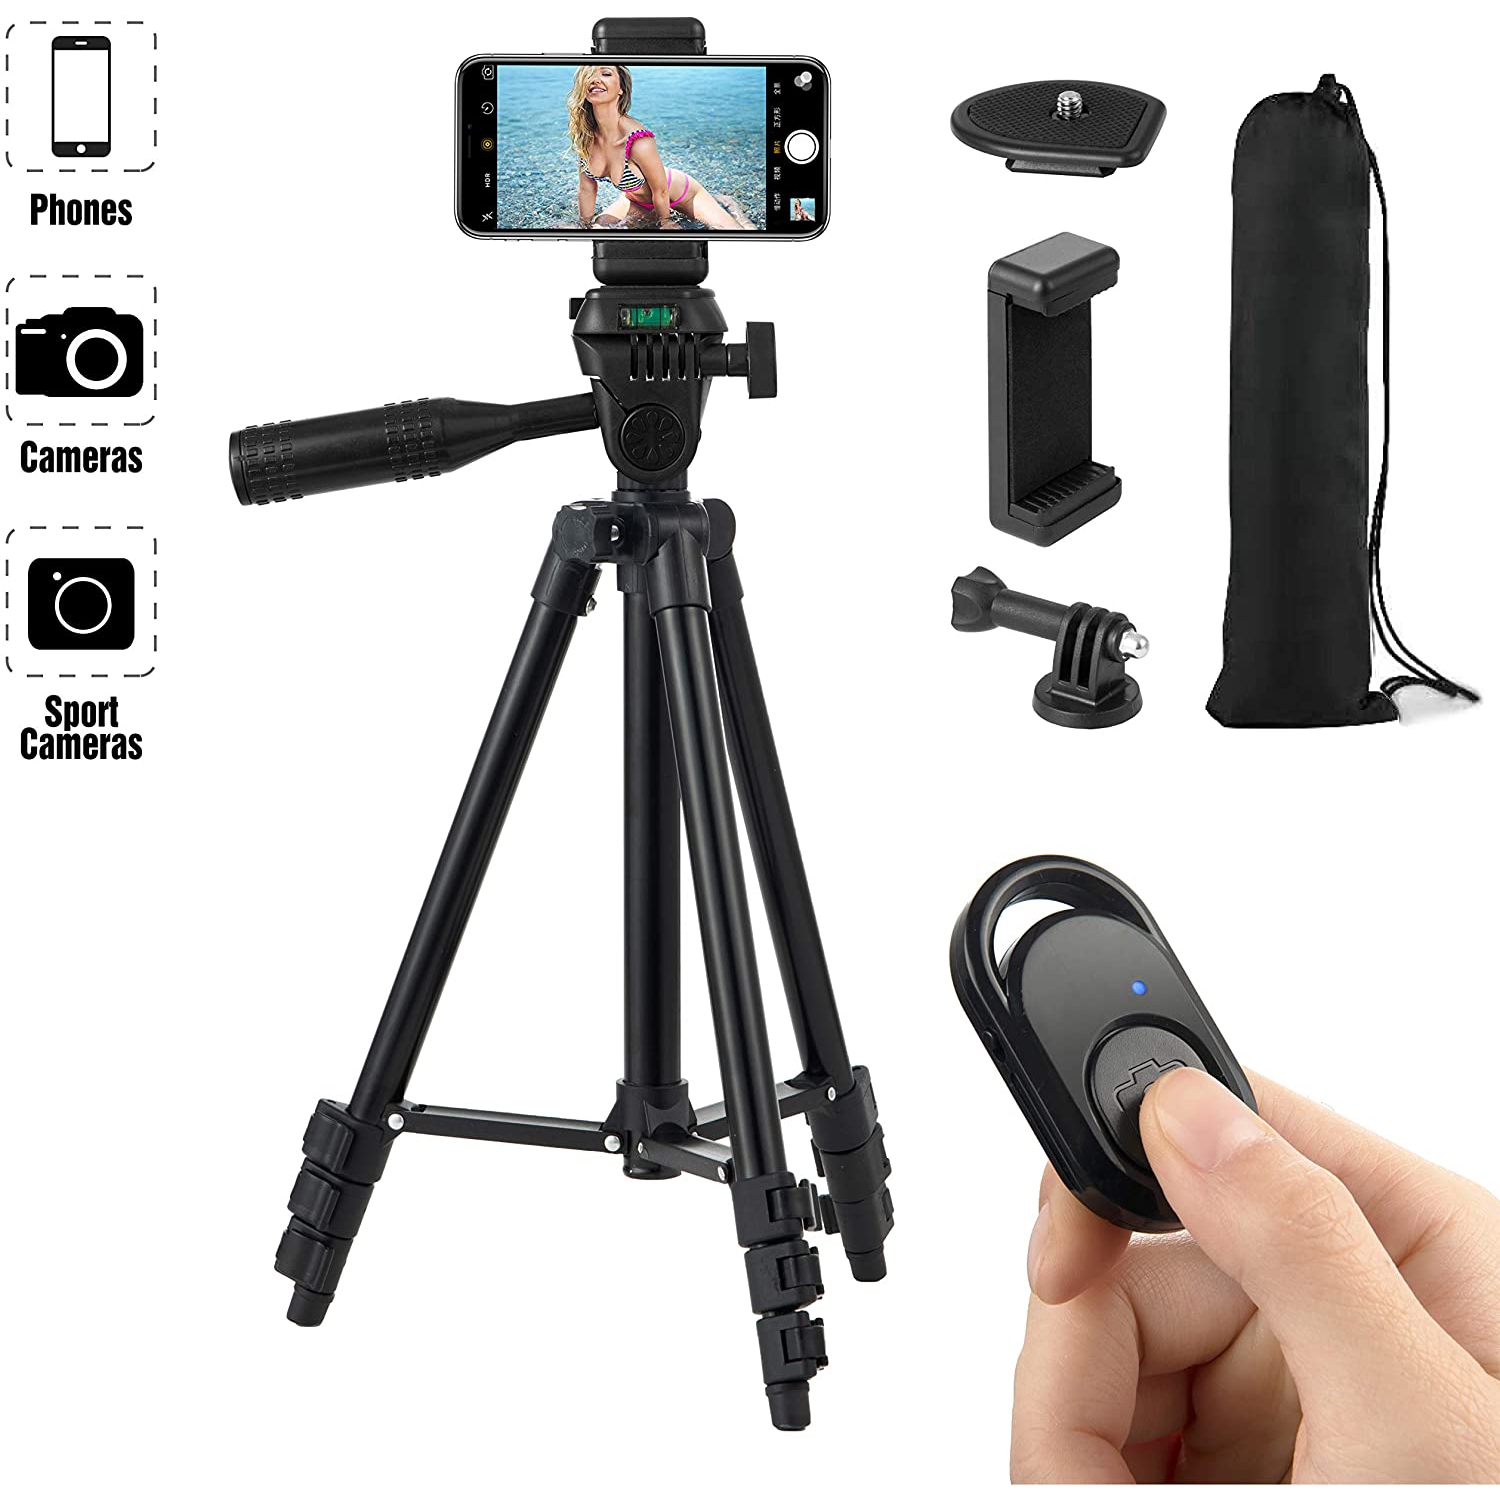 HITSLAM 51 Inch 130cm Aluminum Lightweight Phone Tripod for Apple Samsung Huawei Smartphone, Camera with Bluetooth Remote Control, Carrying Bag and Gopro Mount (Black)